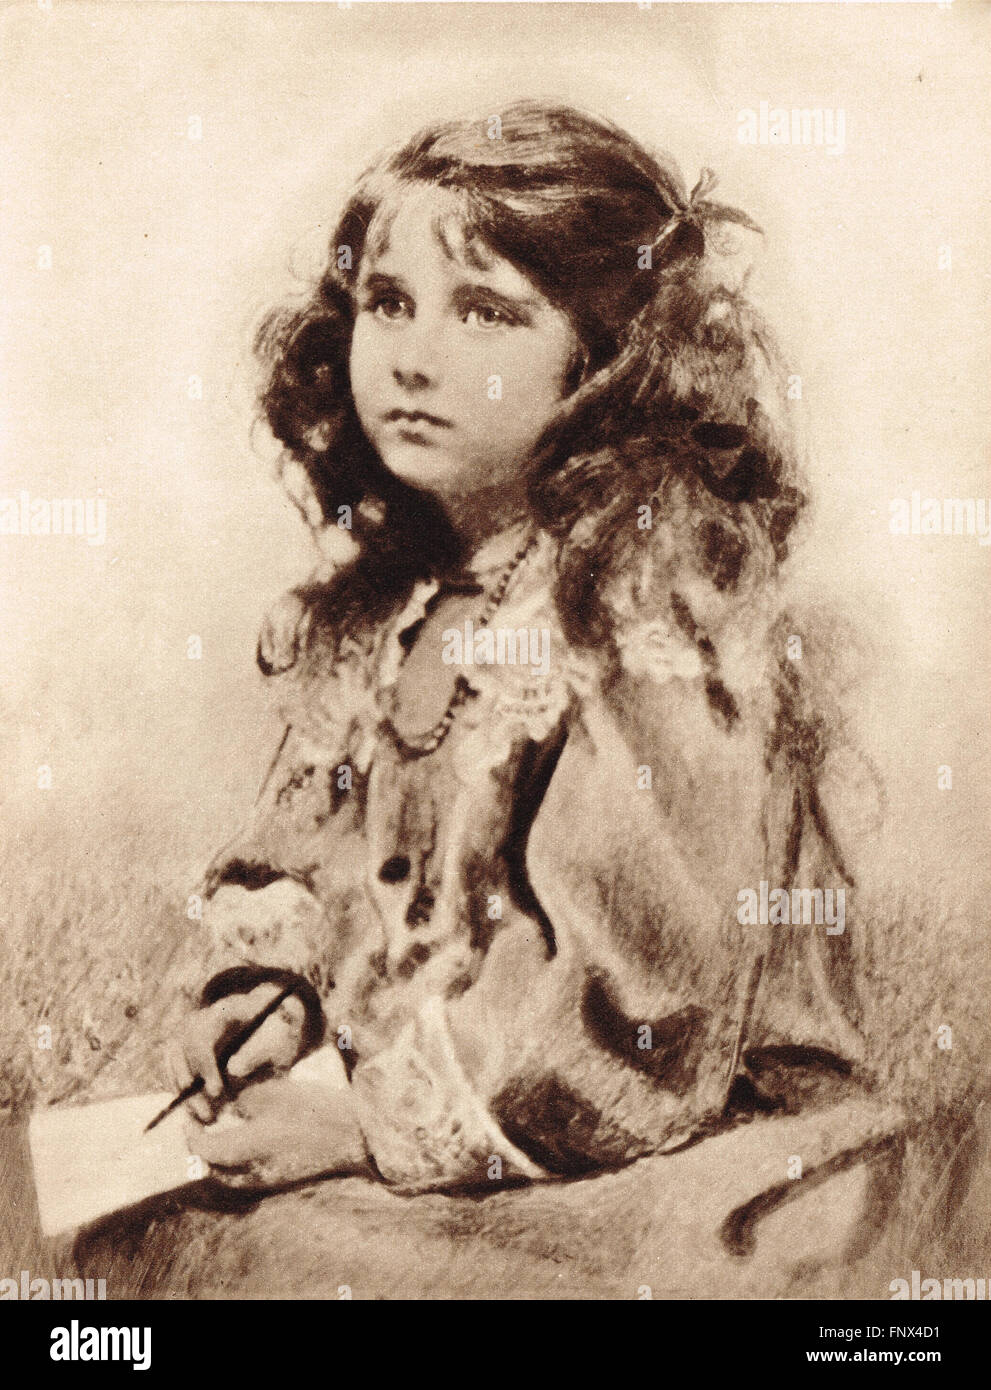 Elizabeth Bowes-Lyon The Queen Mother (1900-2002) as a young girl in 1906 Stock Photo